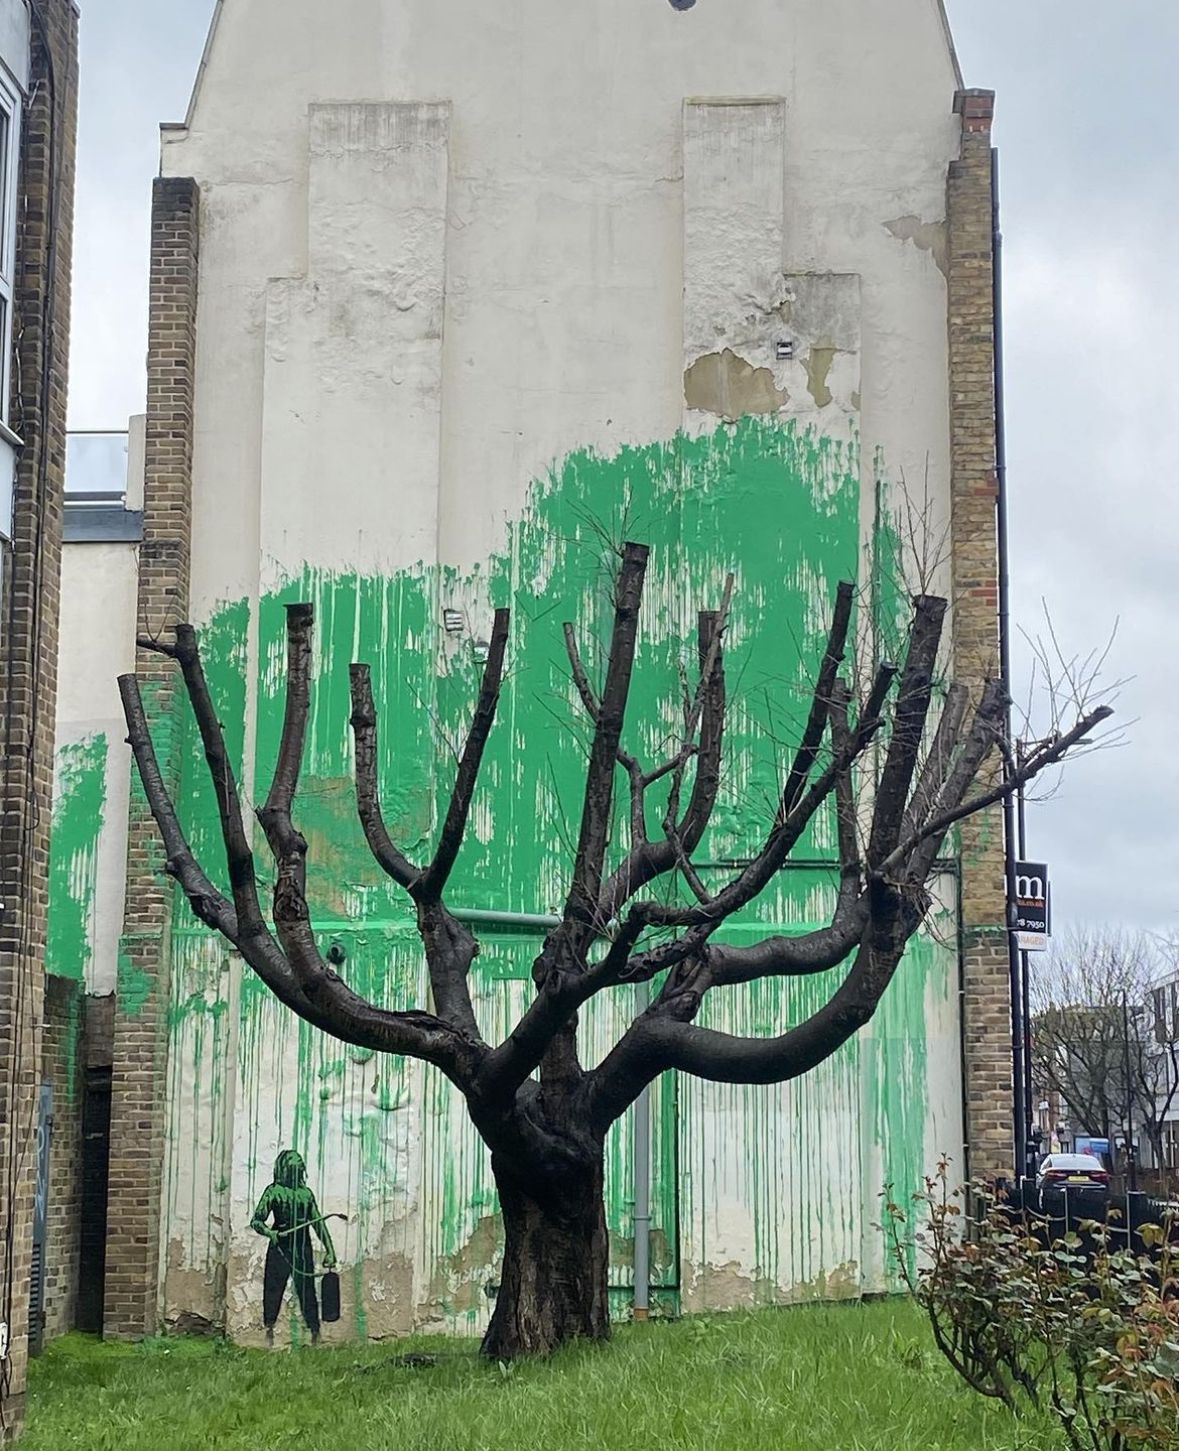 Supposed New Banksy Artwork A mass of green has been painted behind a cut-back mature tree to look like foliage, with a stencil of a person holding a pressure hose next to it.